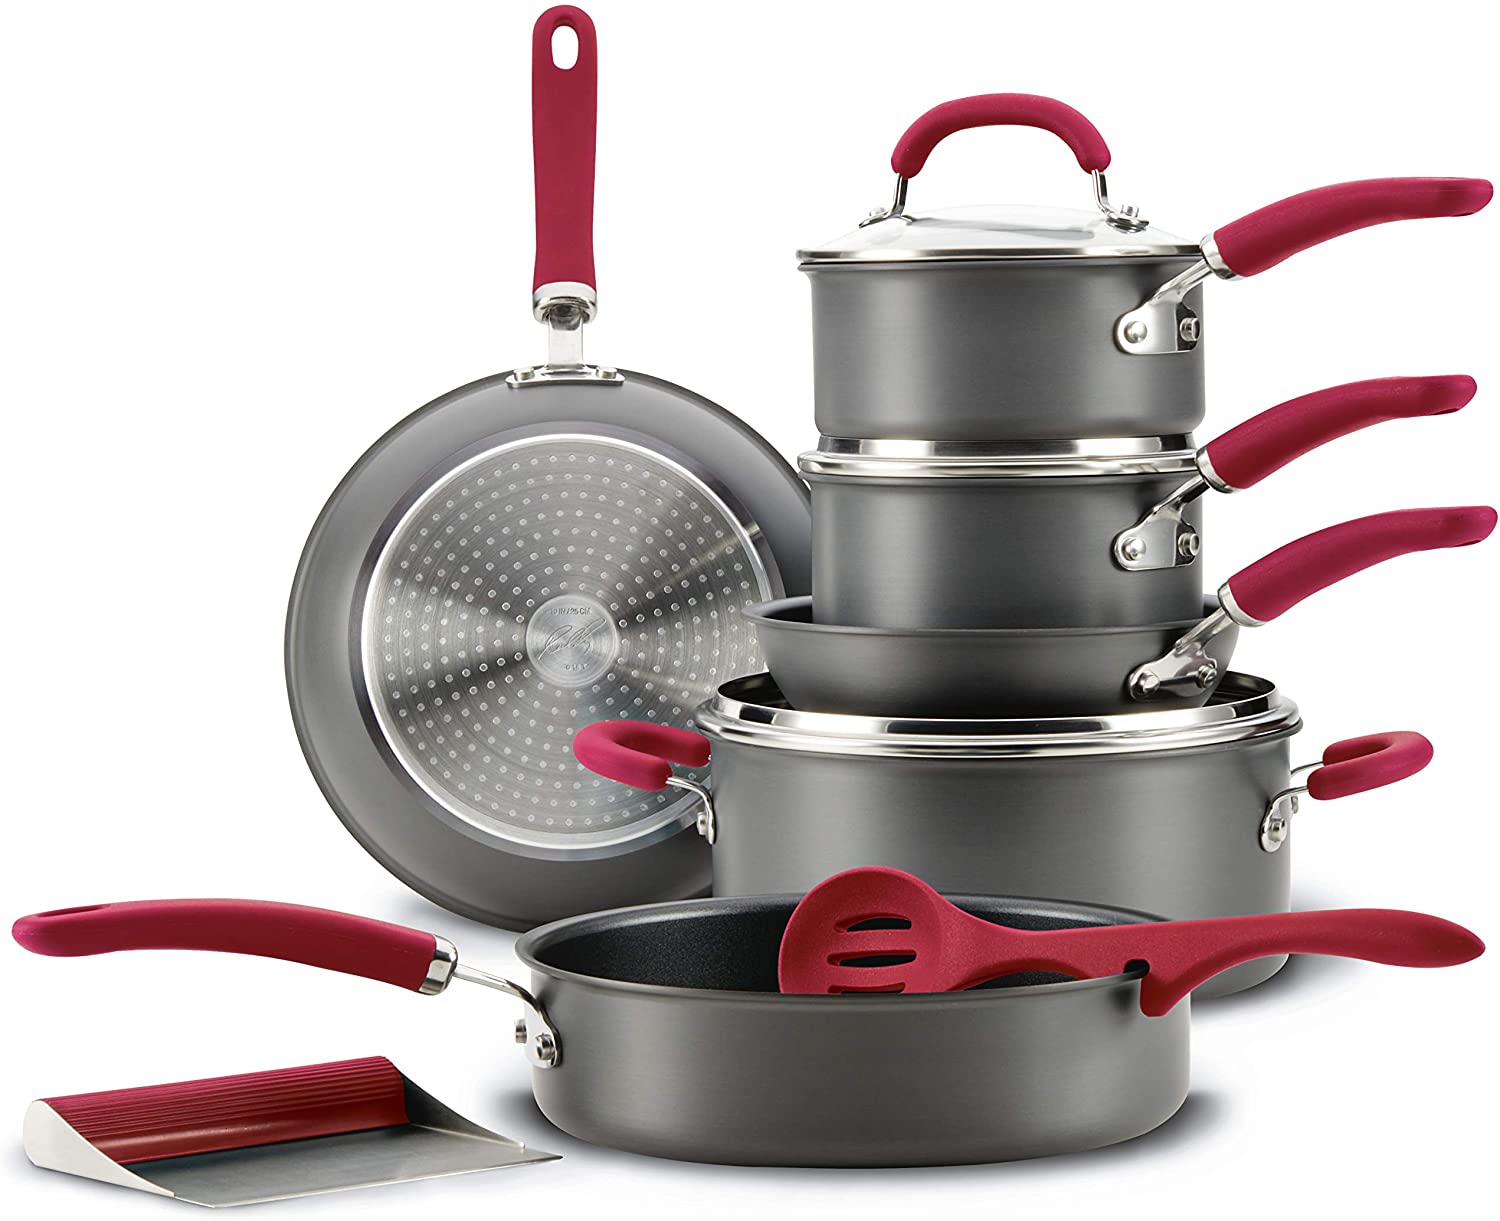 Rachael Ray Create Delicious Hard Anodized Nonstick Cookware Pots